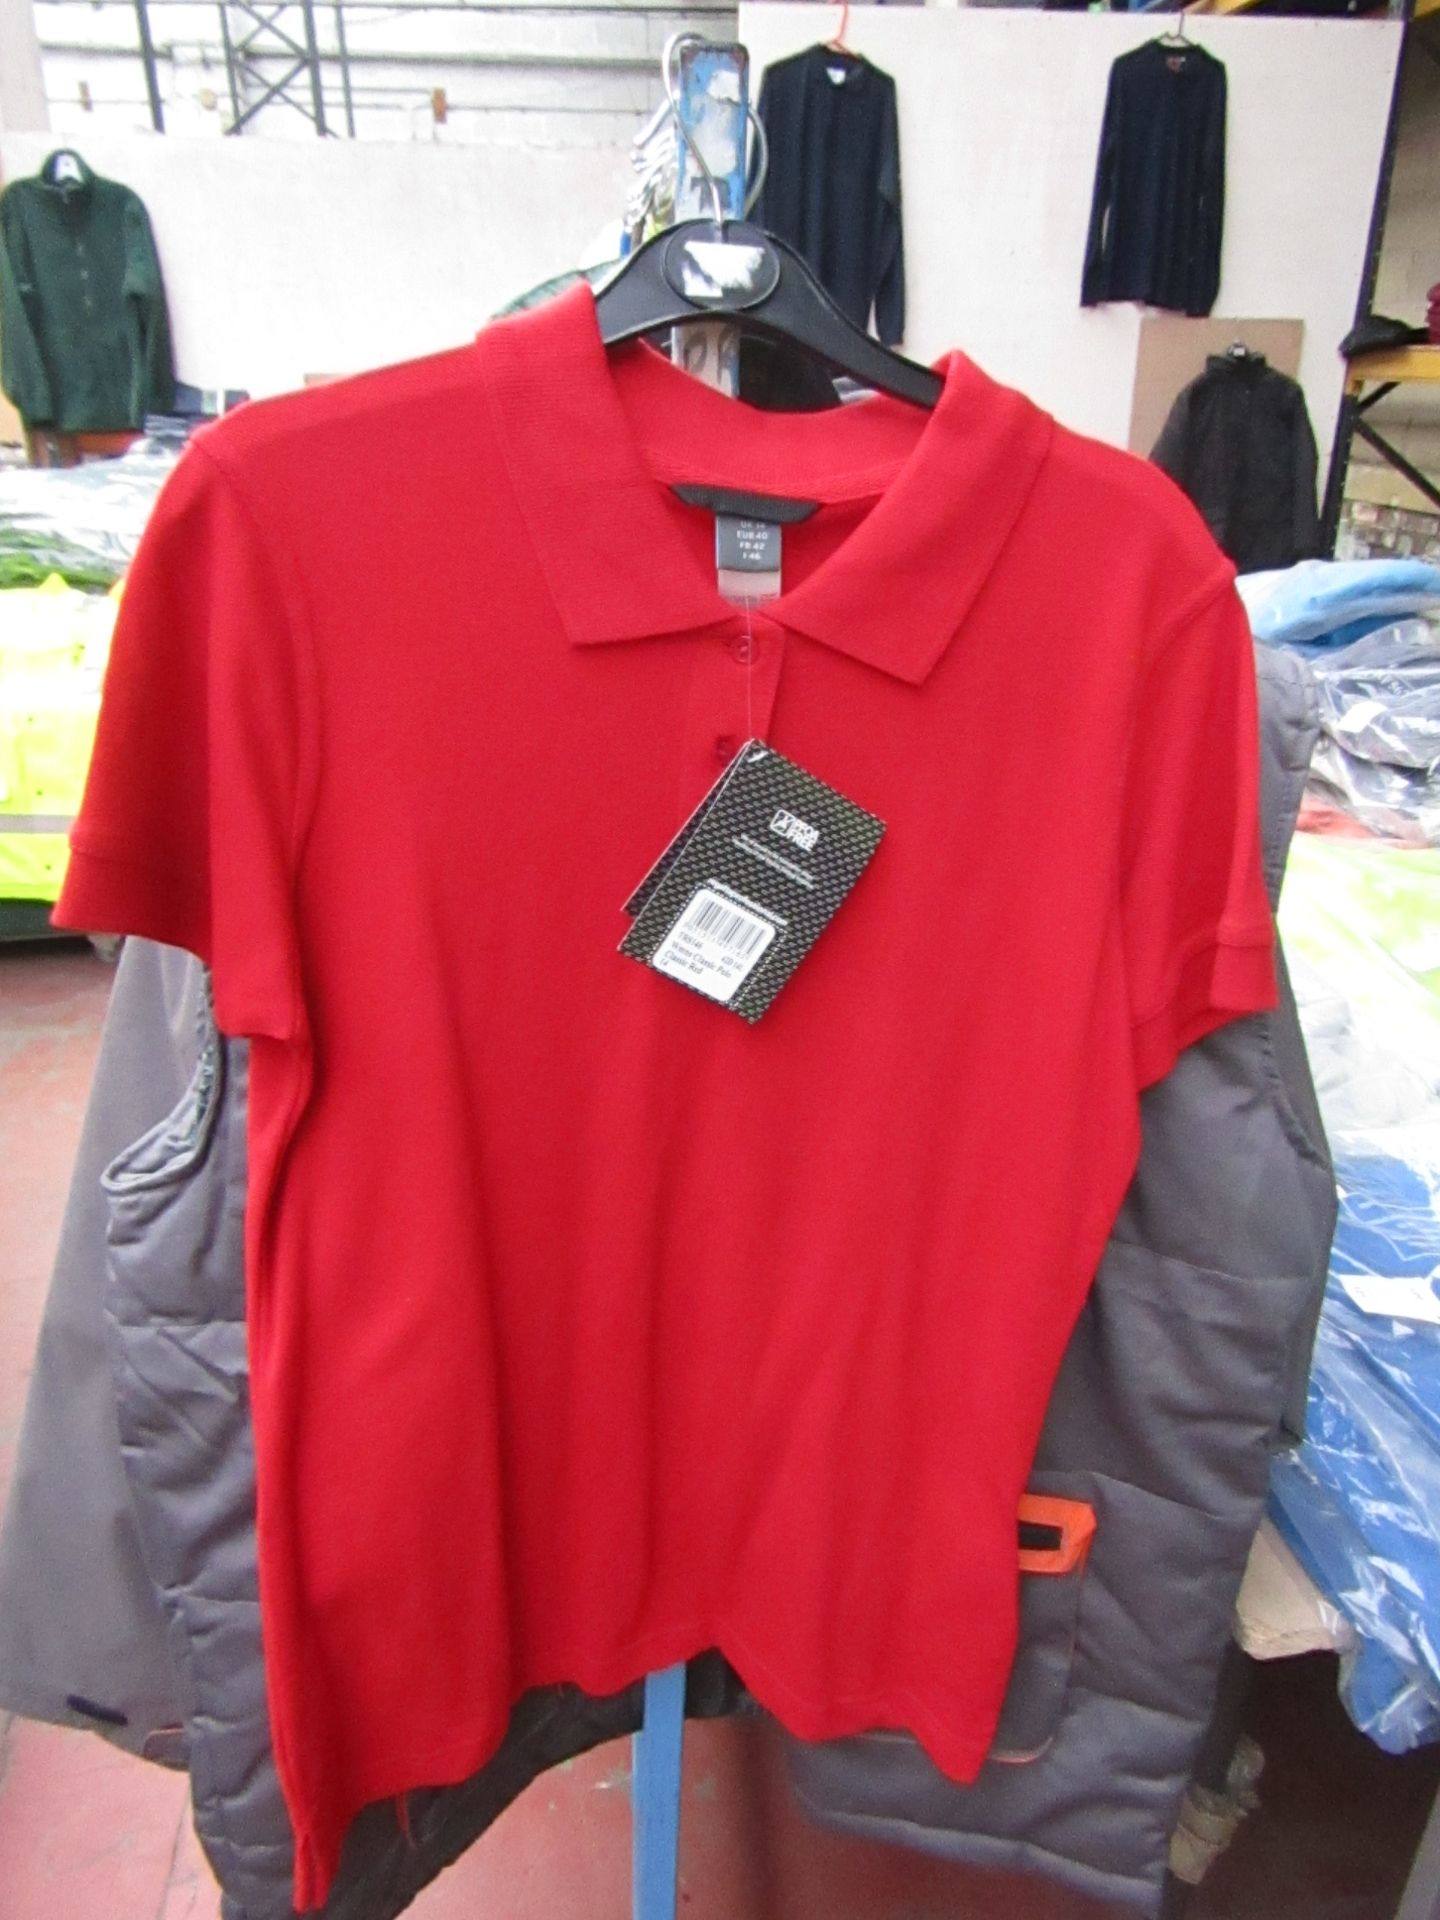 2x Ladies Regatta Red Polo Shirt, Size 18. New in Packaging